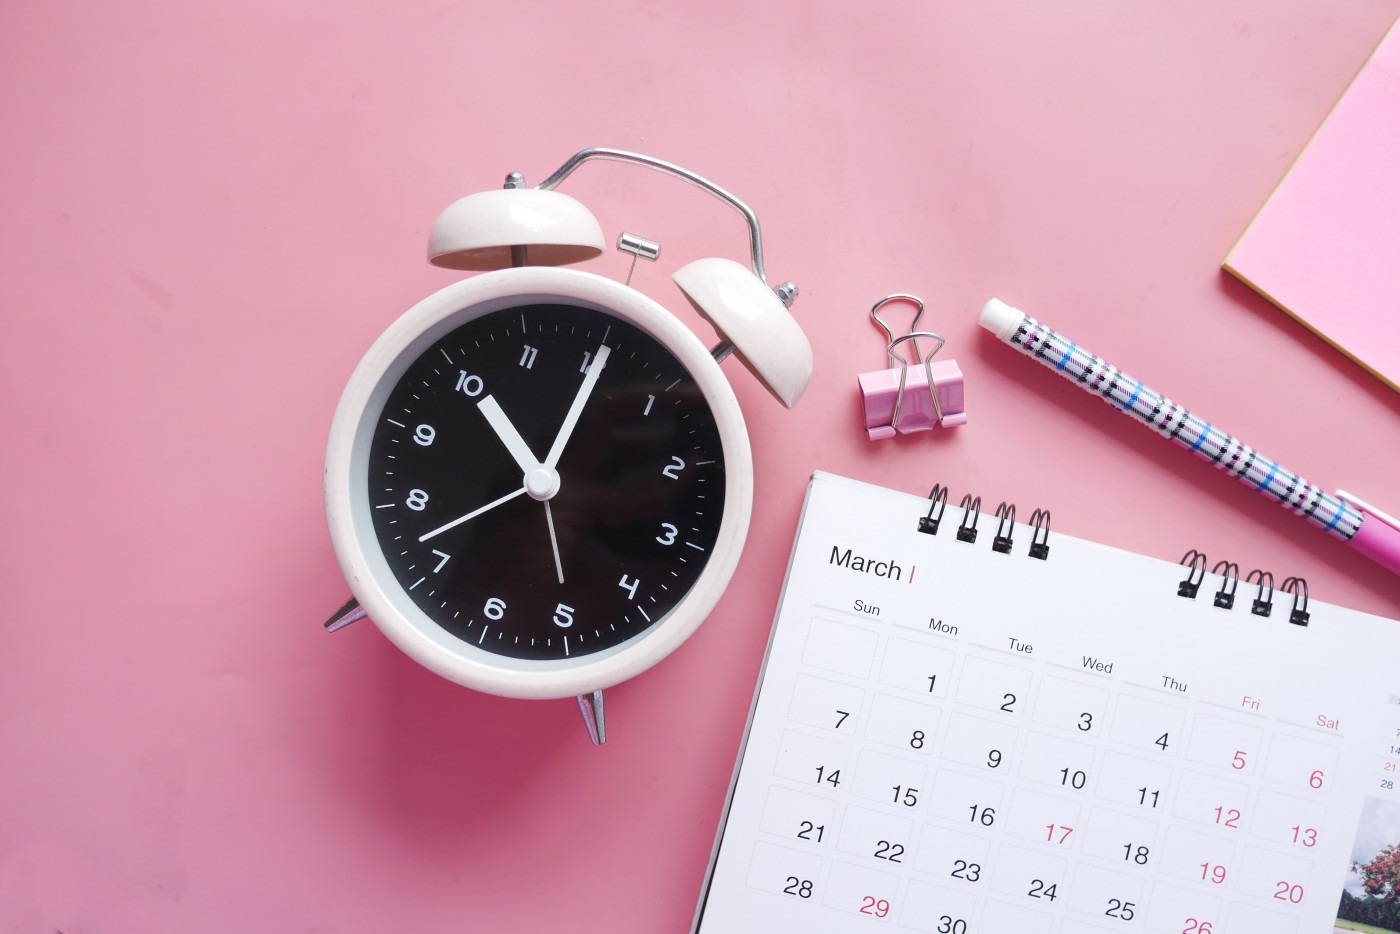 Picture showing a clock indicating deadline/Image: Unsplash